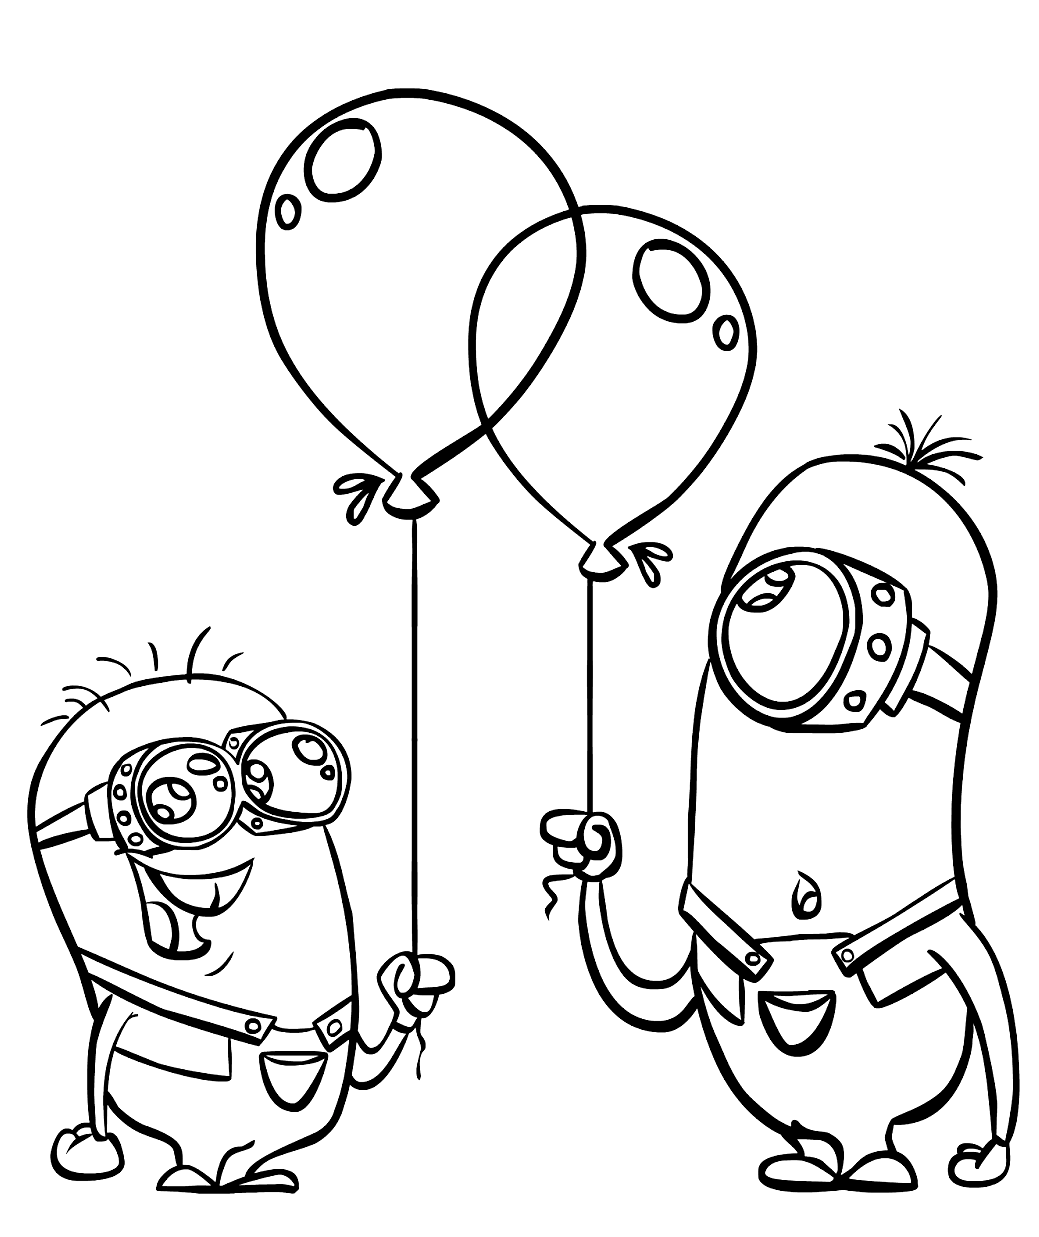 Minions From The Despicable Me Films Coloring Pages